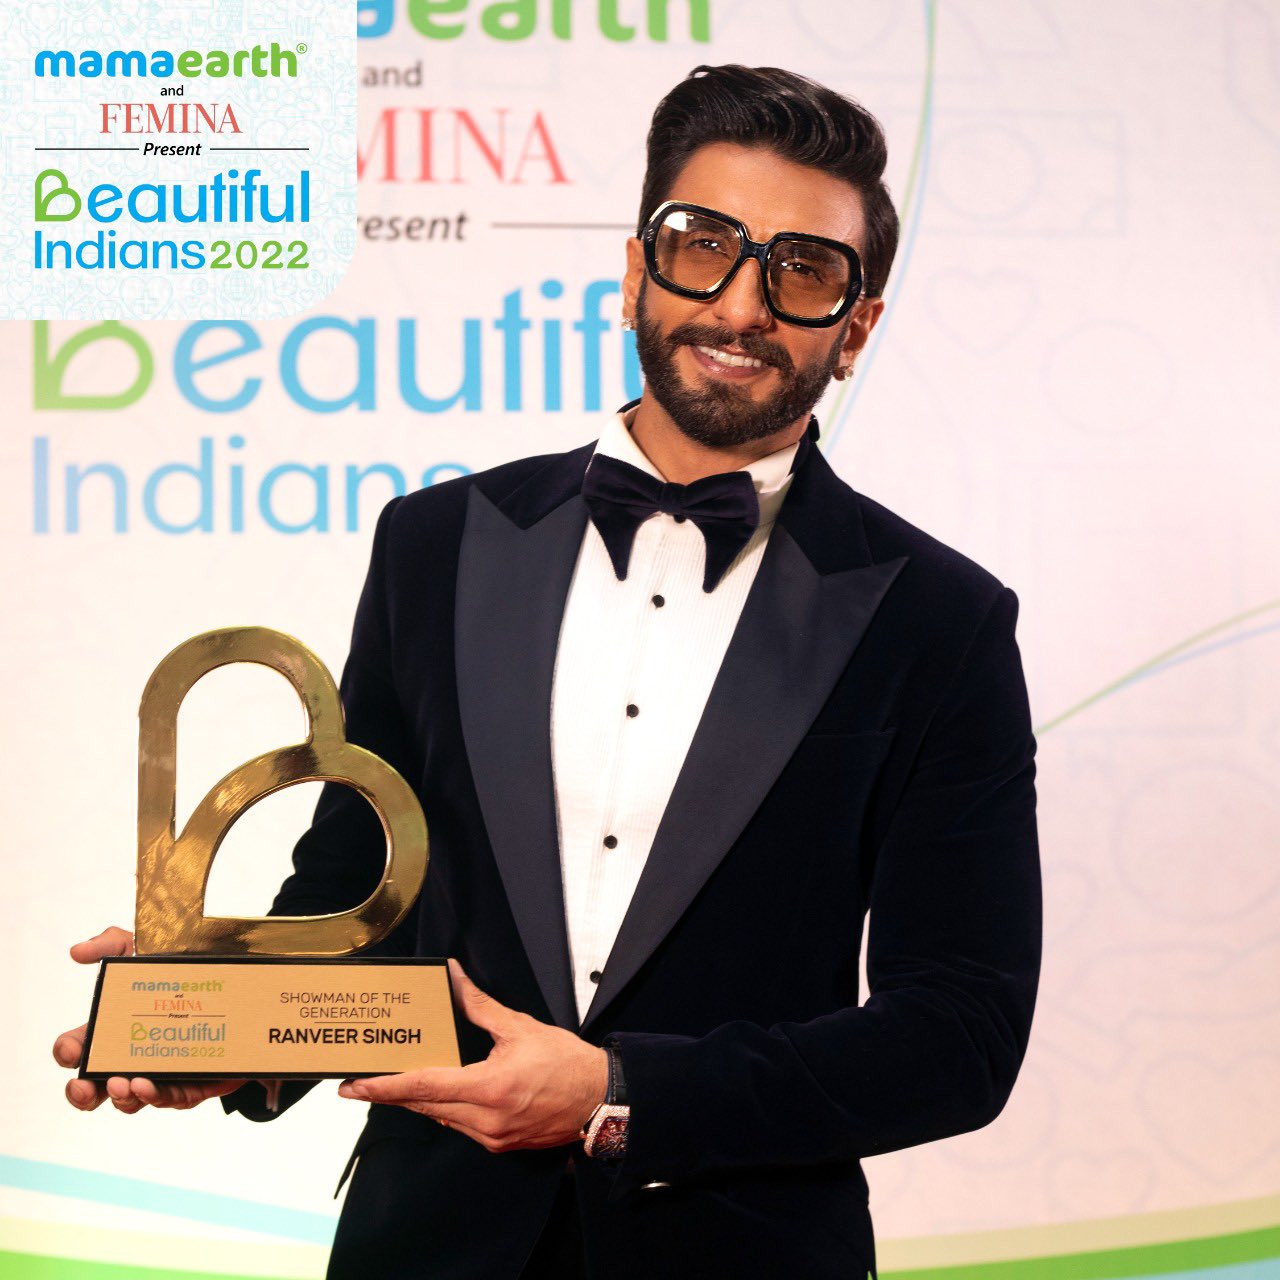 Ranveer Singh honoured with Femina's 'Showman of the Generation' award;  says 'I'm humbled and grateful